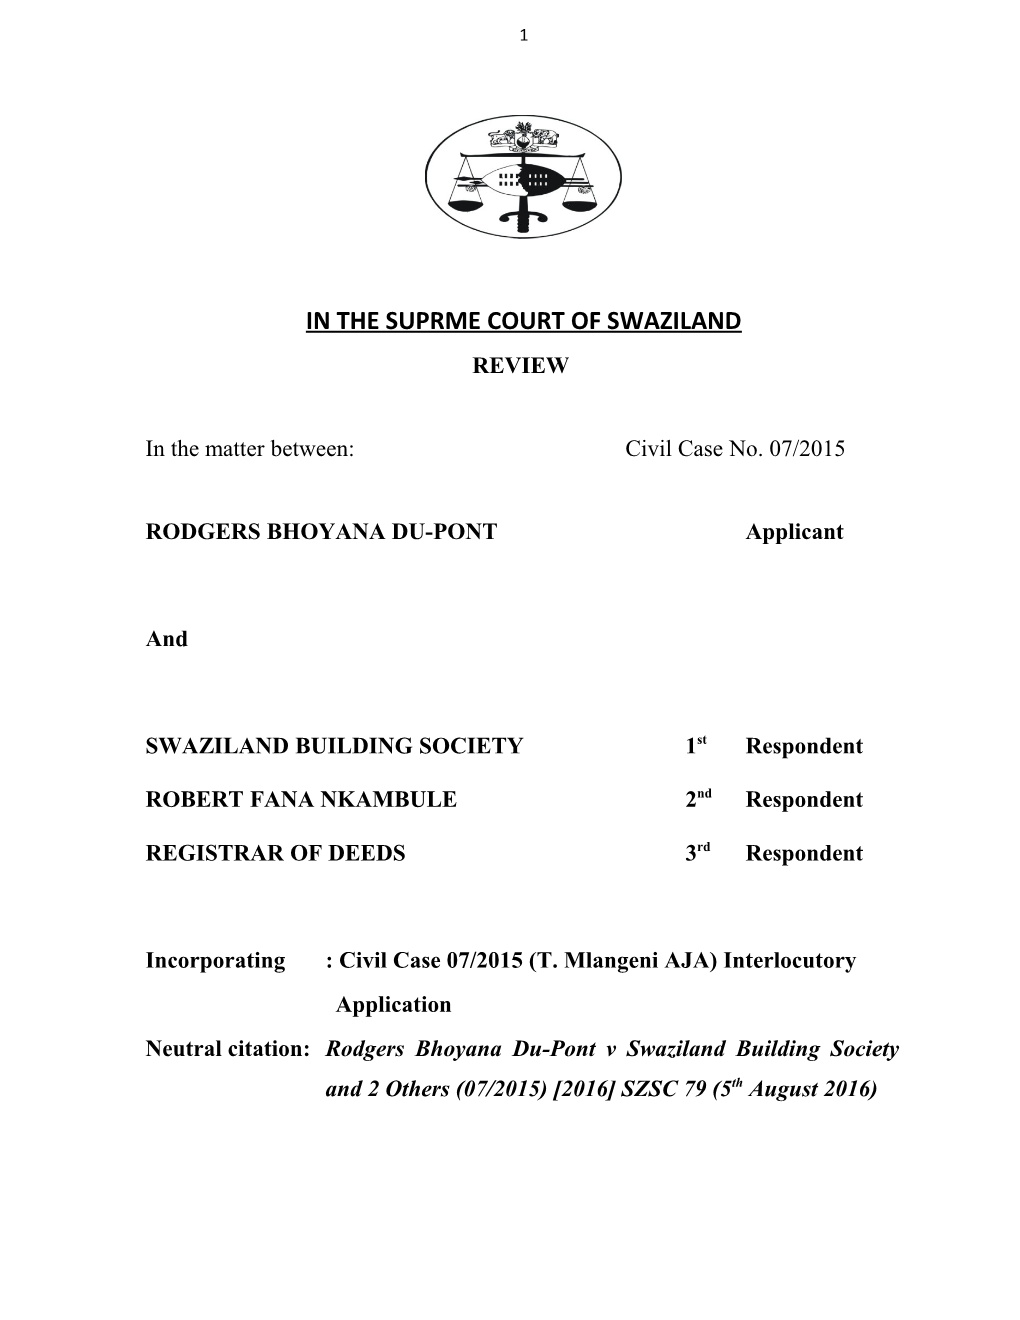 In the Suprme Court of Swaziland